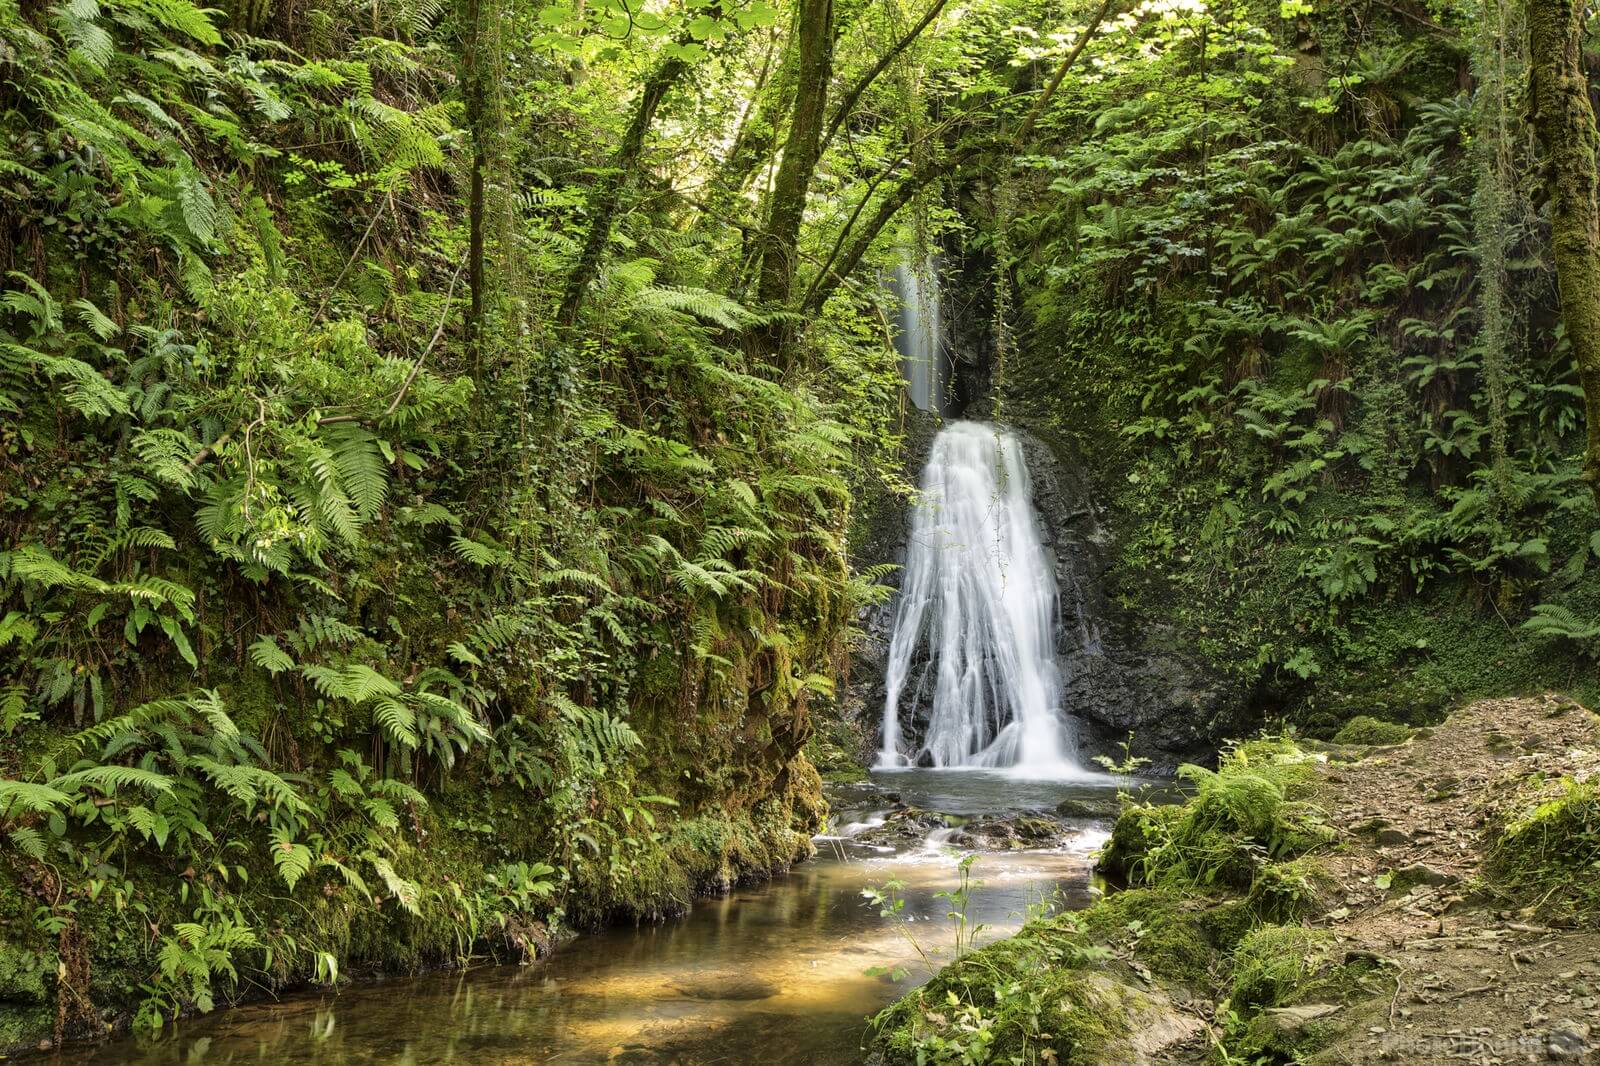 Image of Spooyt Vane Waterfall by David Silvester